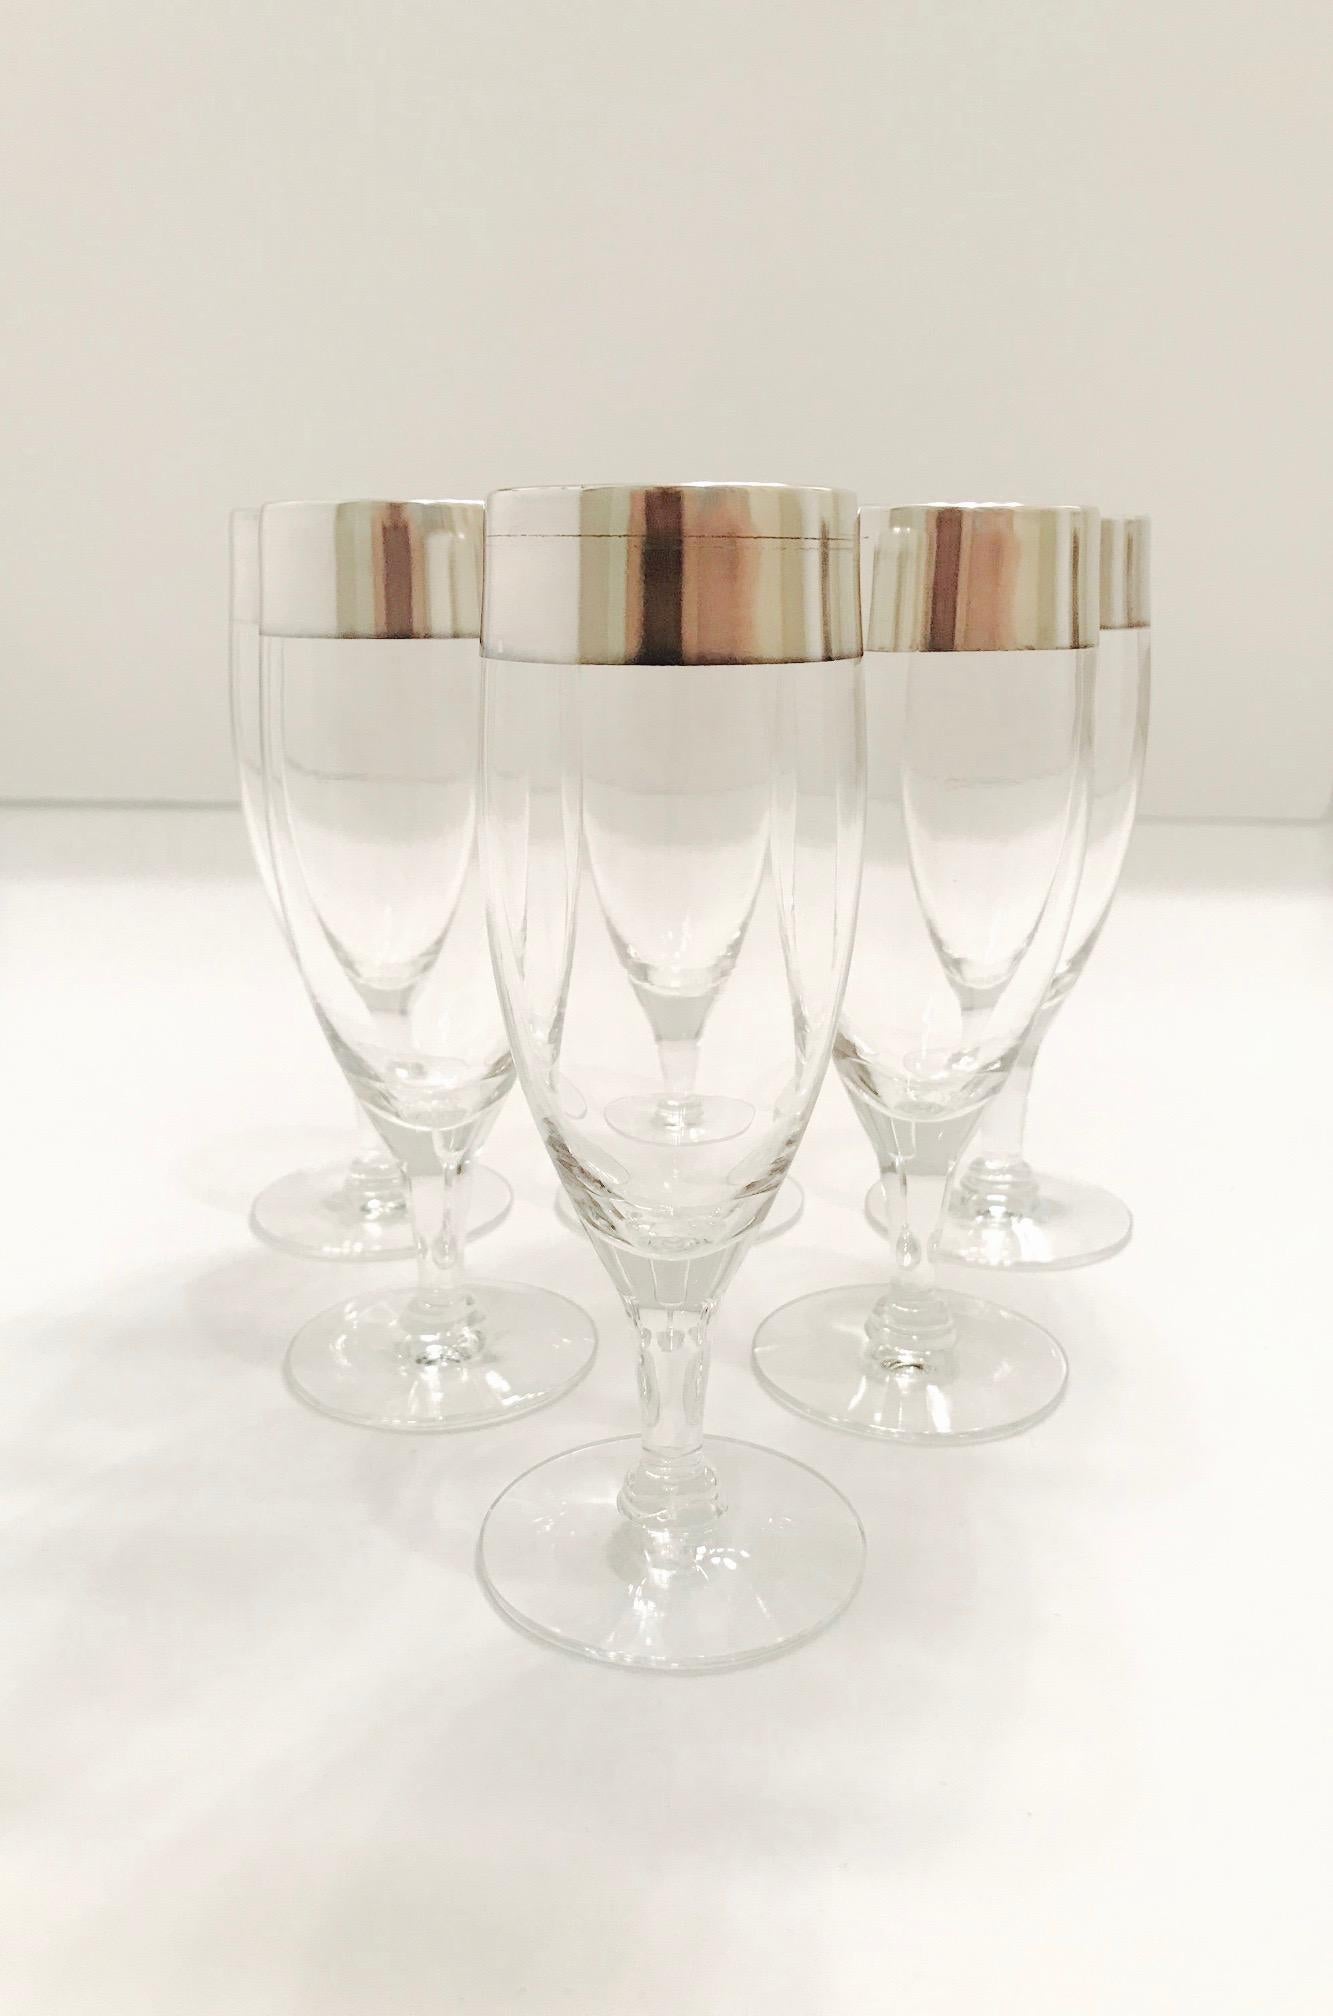 Mid-Century Modern Set/Six Champagne Flutes with Sterling Silver Overlay by Dorothy Thorpe, c. 1950